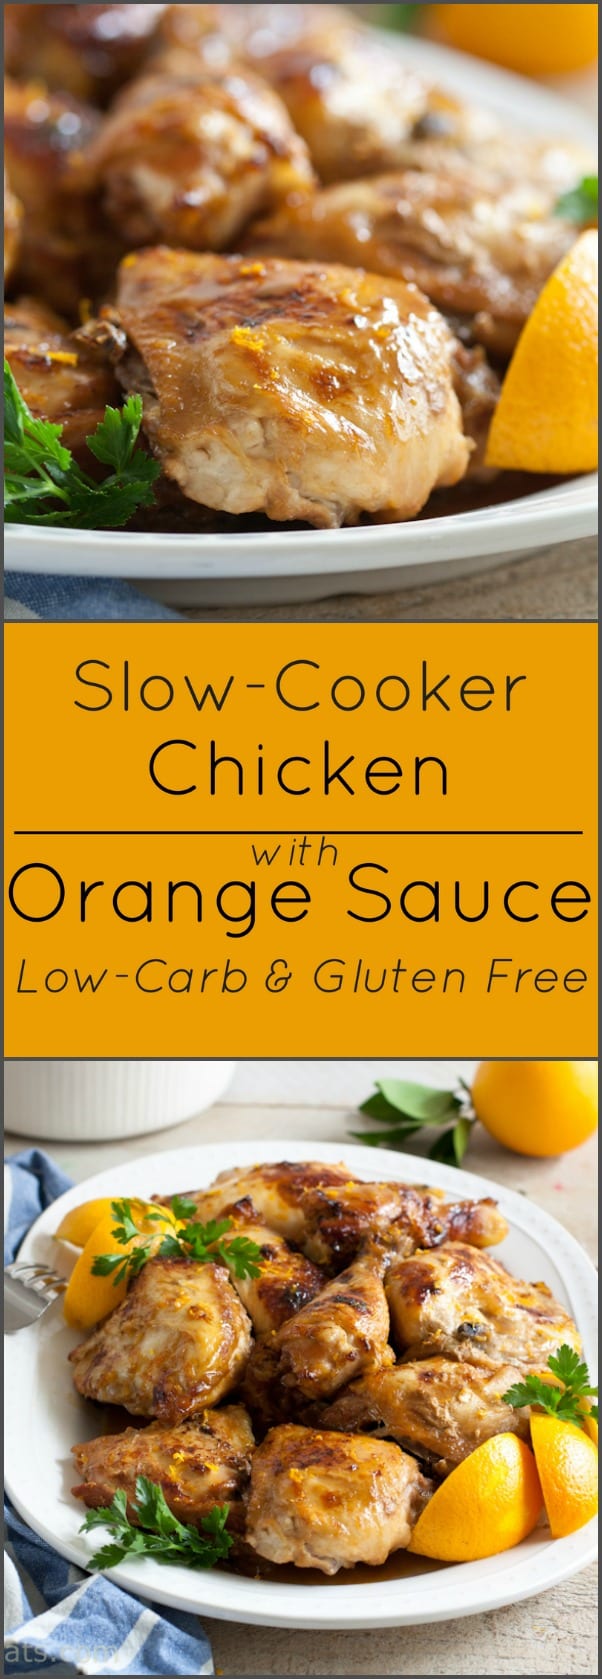 Slow-cooker Chicken with Orange Sauce is gluten free and low-carb.